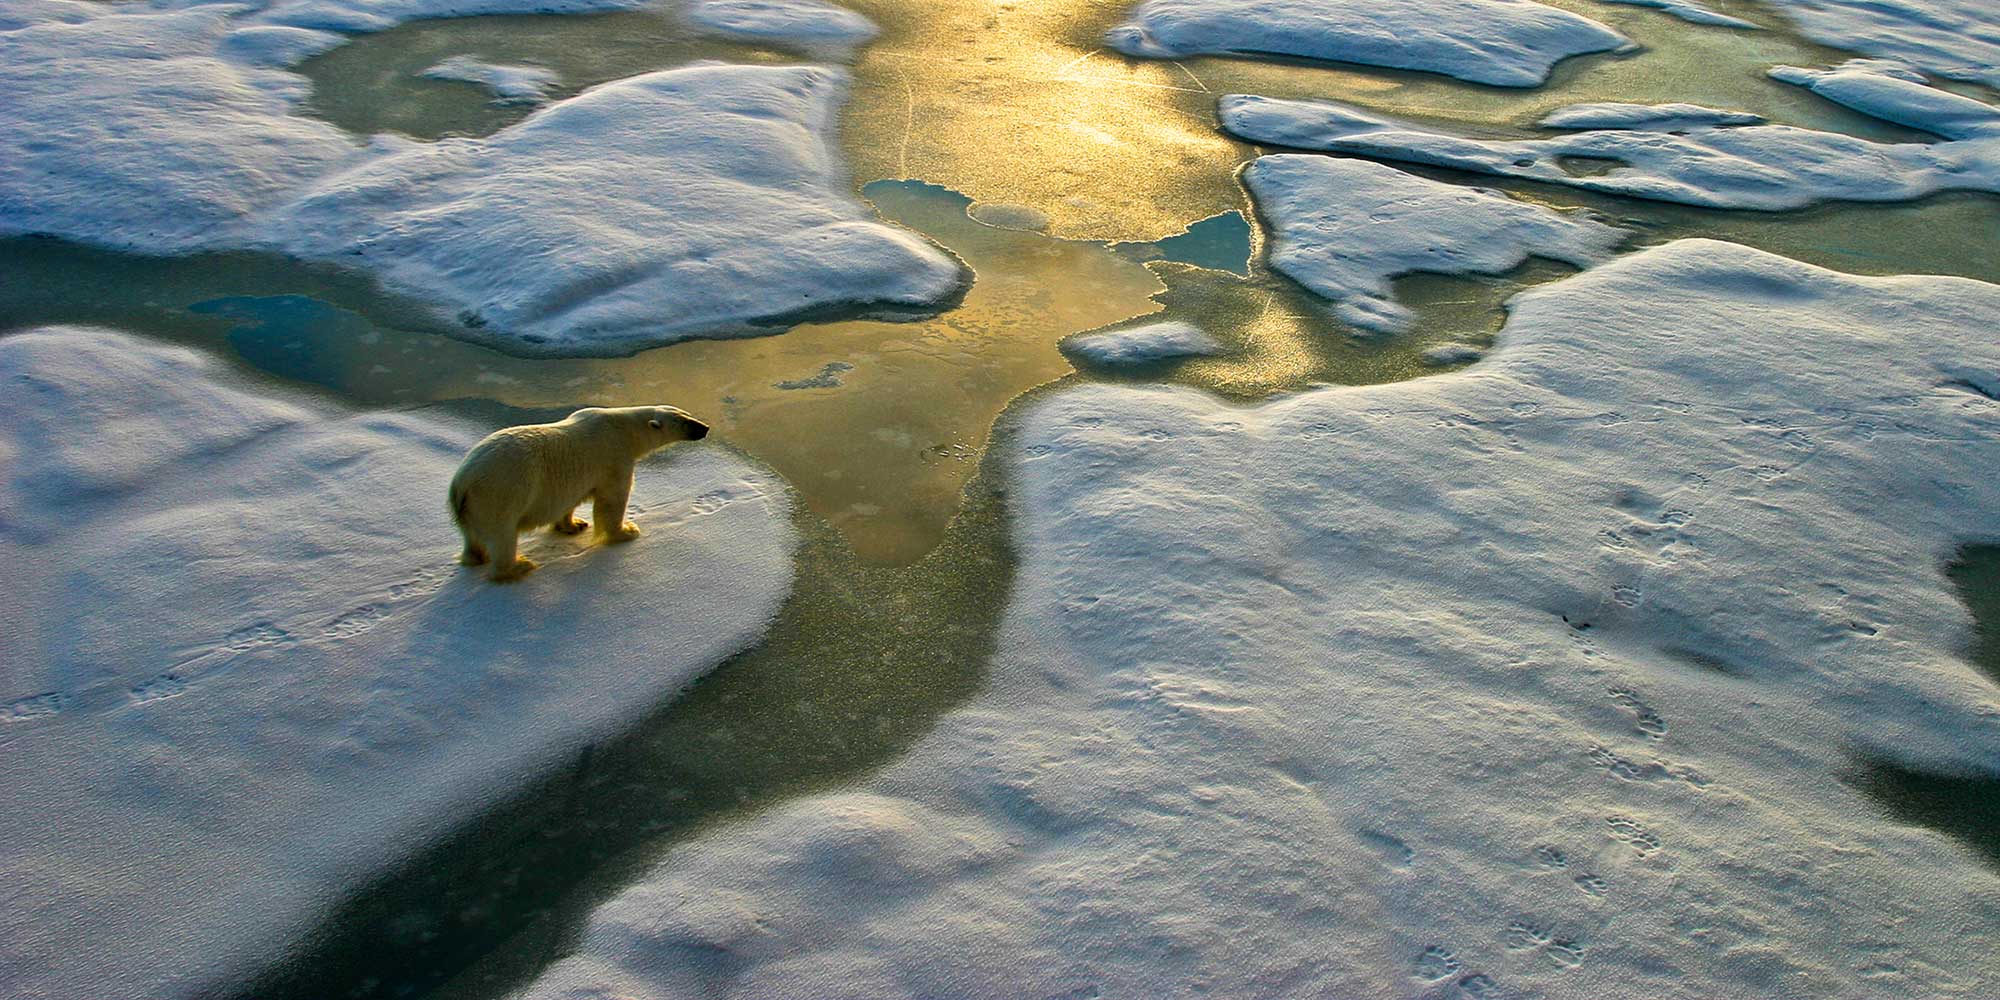 Climate change reducing the ice for polar bear